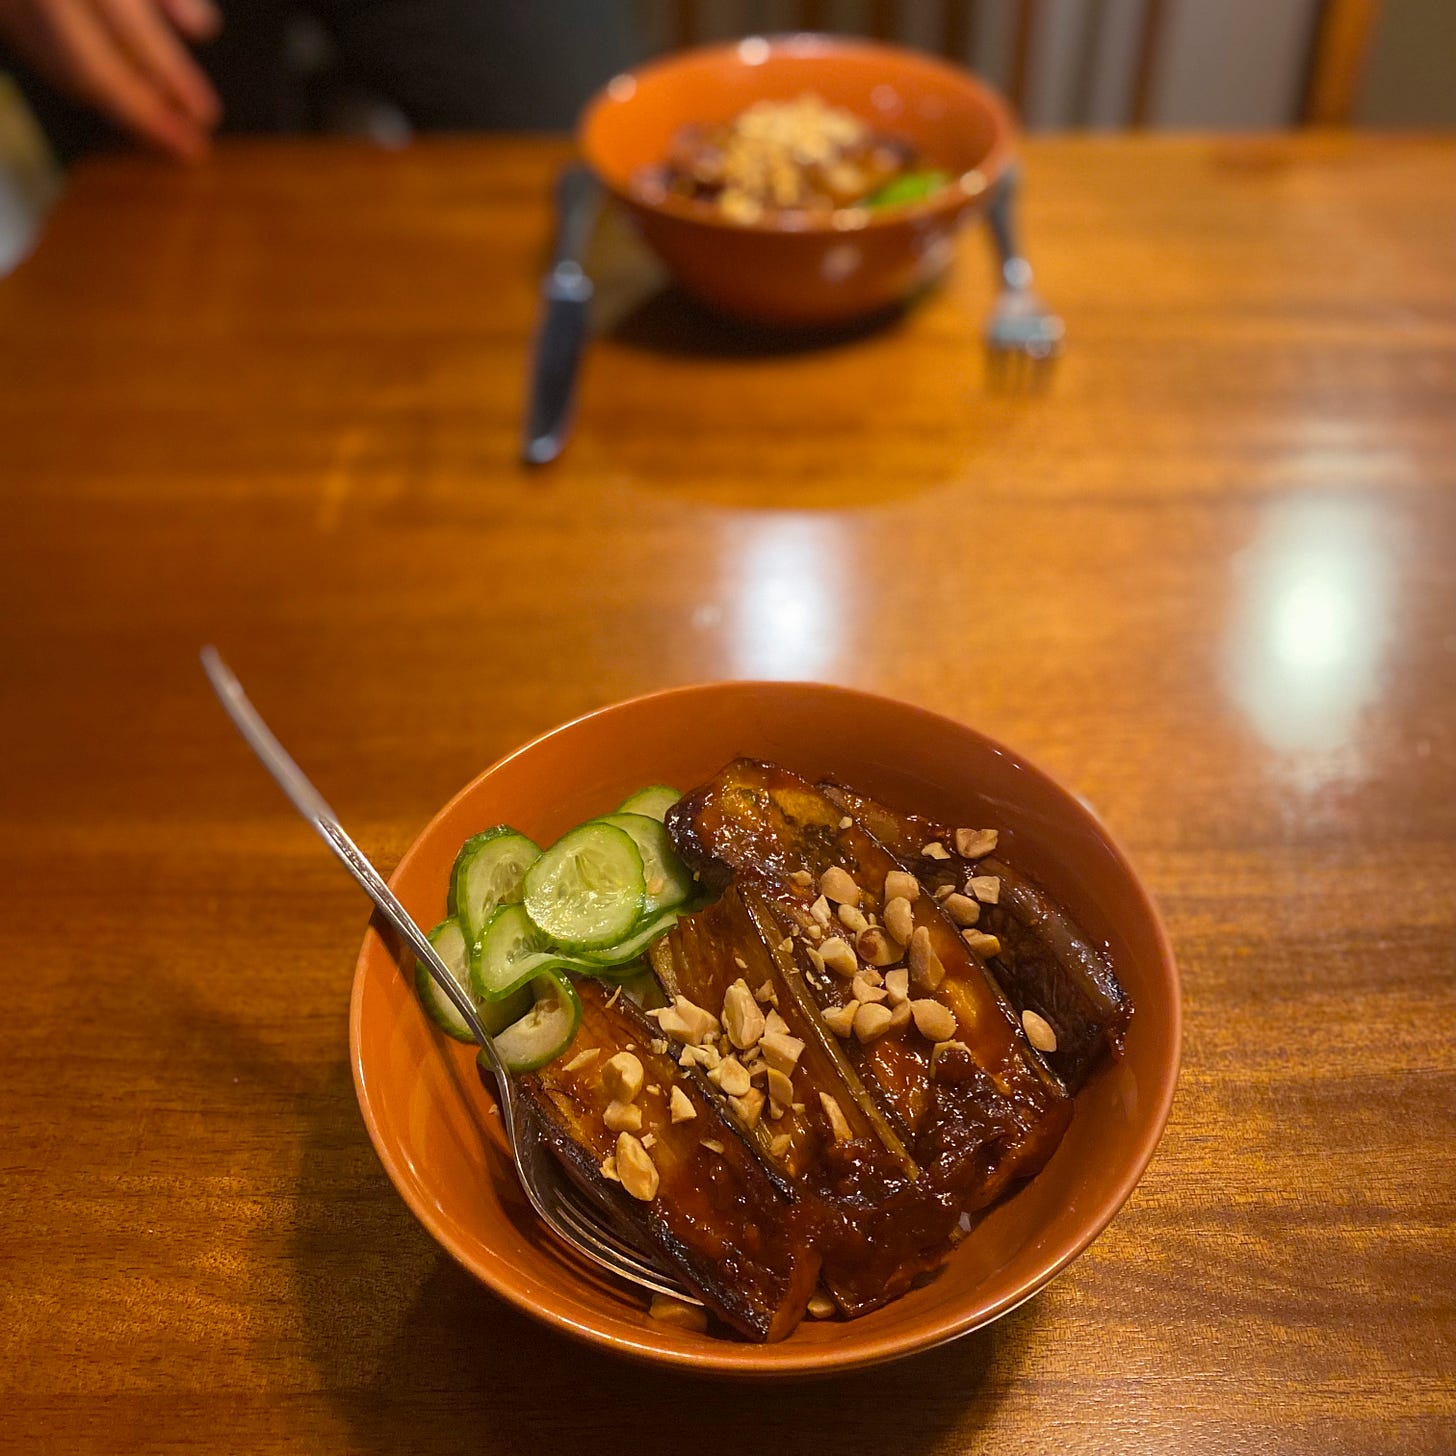 An orange bowl of gochujang-glazed eggplant with thinly sliced cucumber pickle on the side, and chopped peanuts sprinkled over the top.